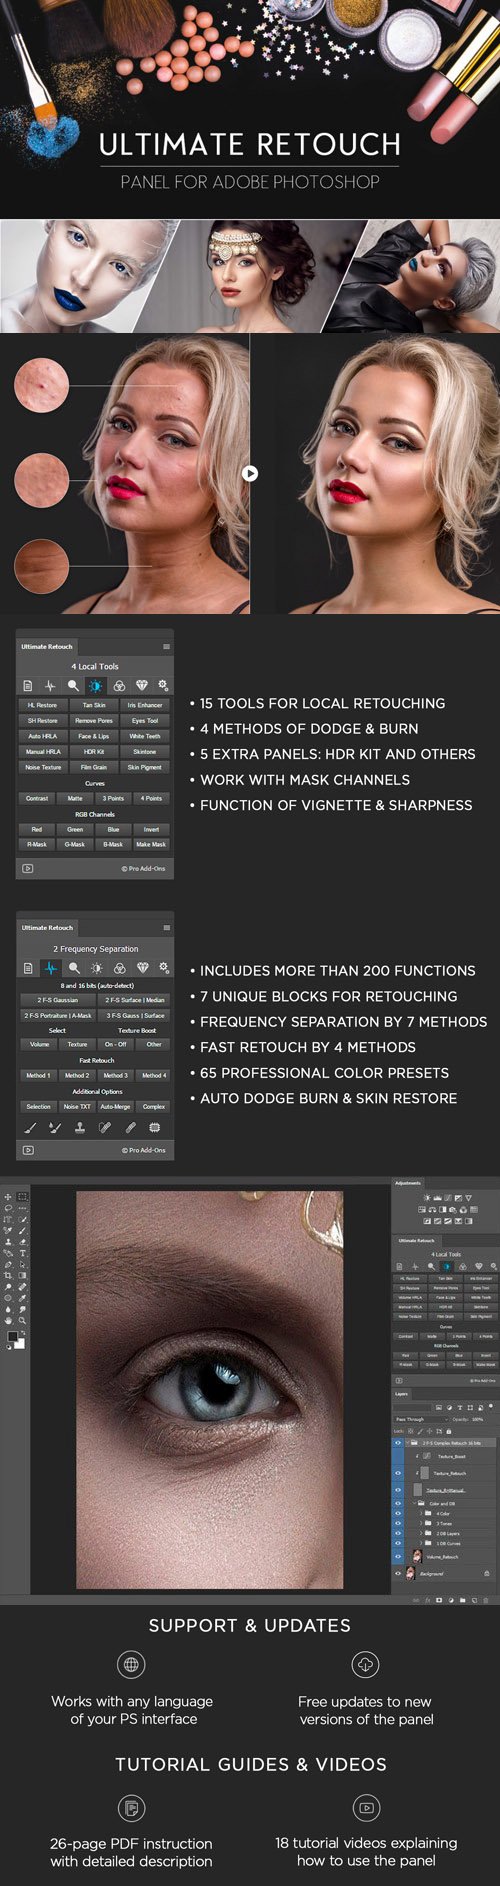 Ultimate Retouch Panel 3.8.50 Plugin for Adobe Photoshop